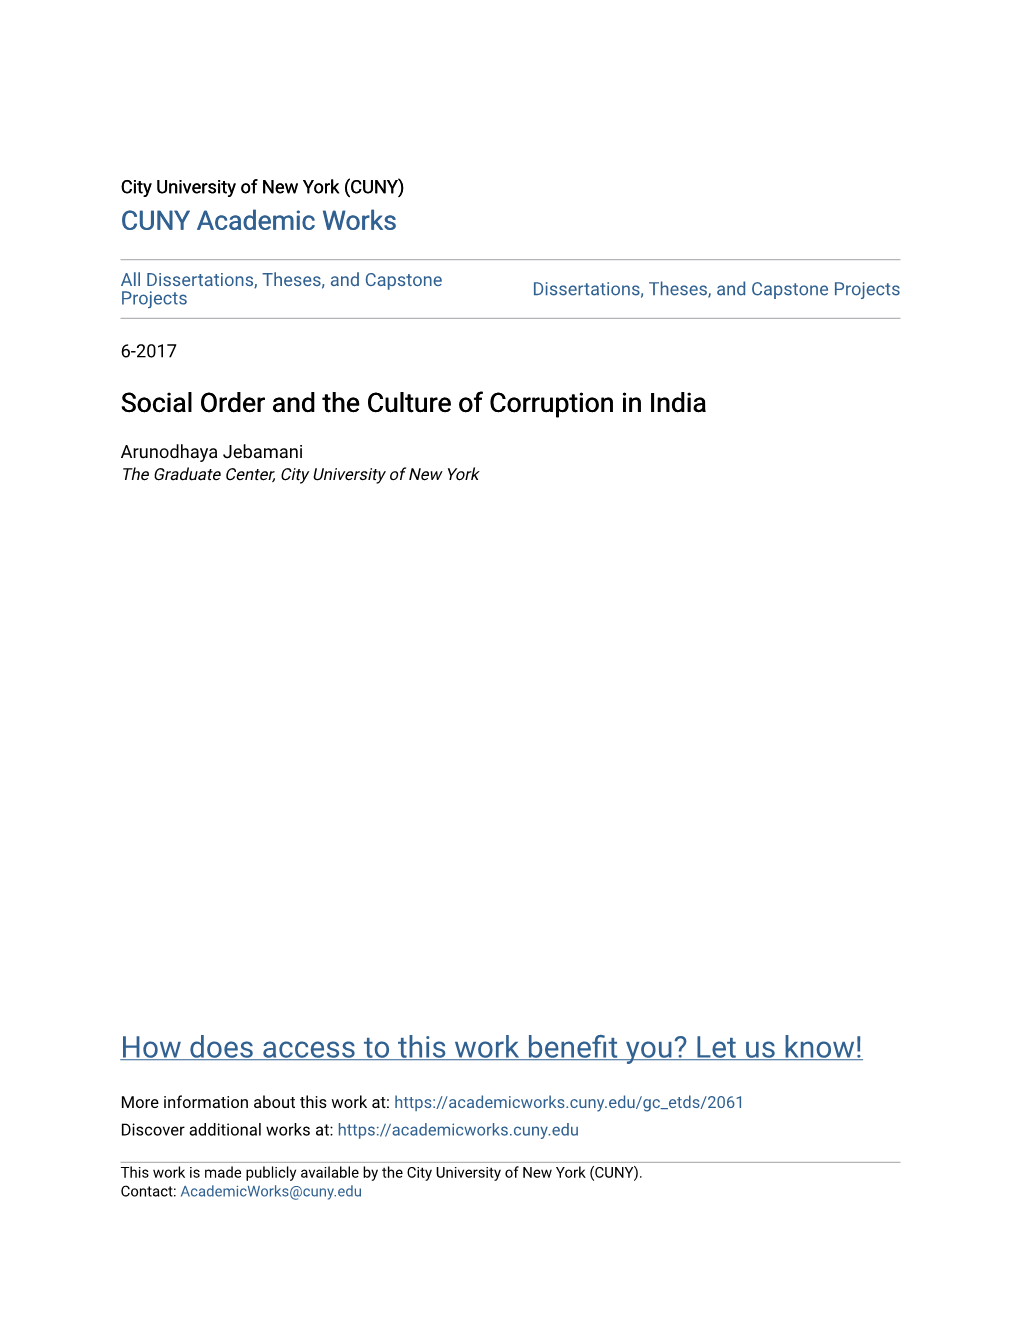 Social Order and the Culture of Corruption in India